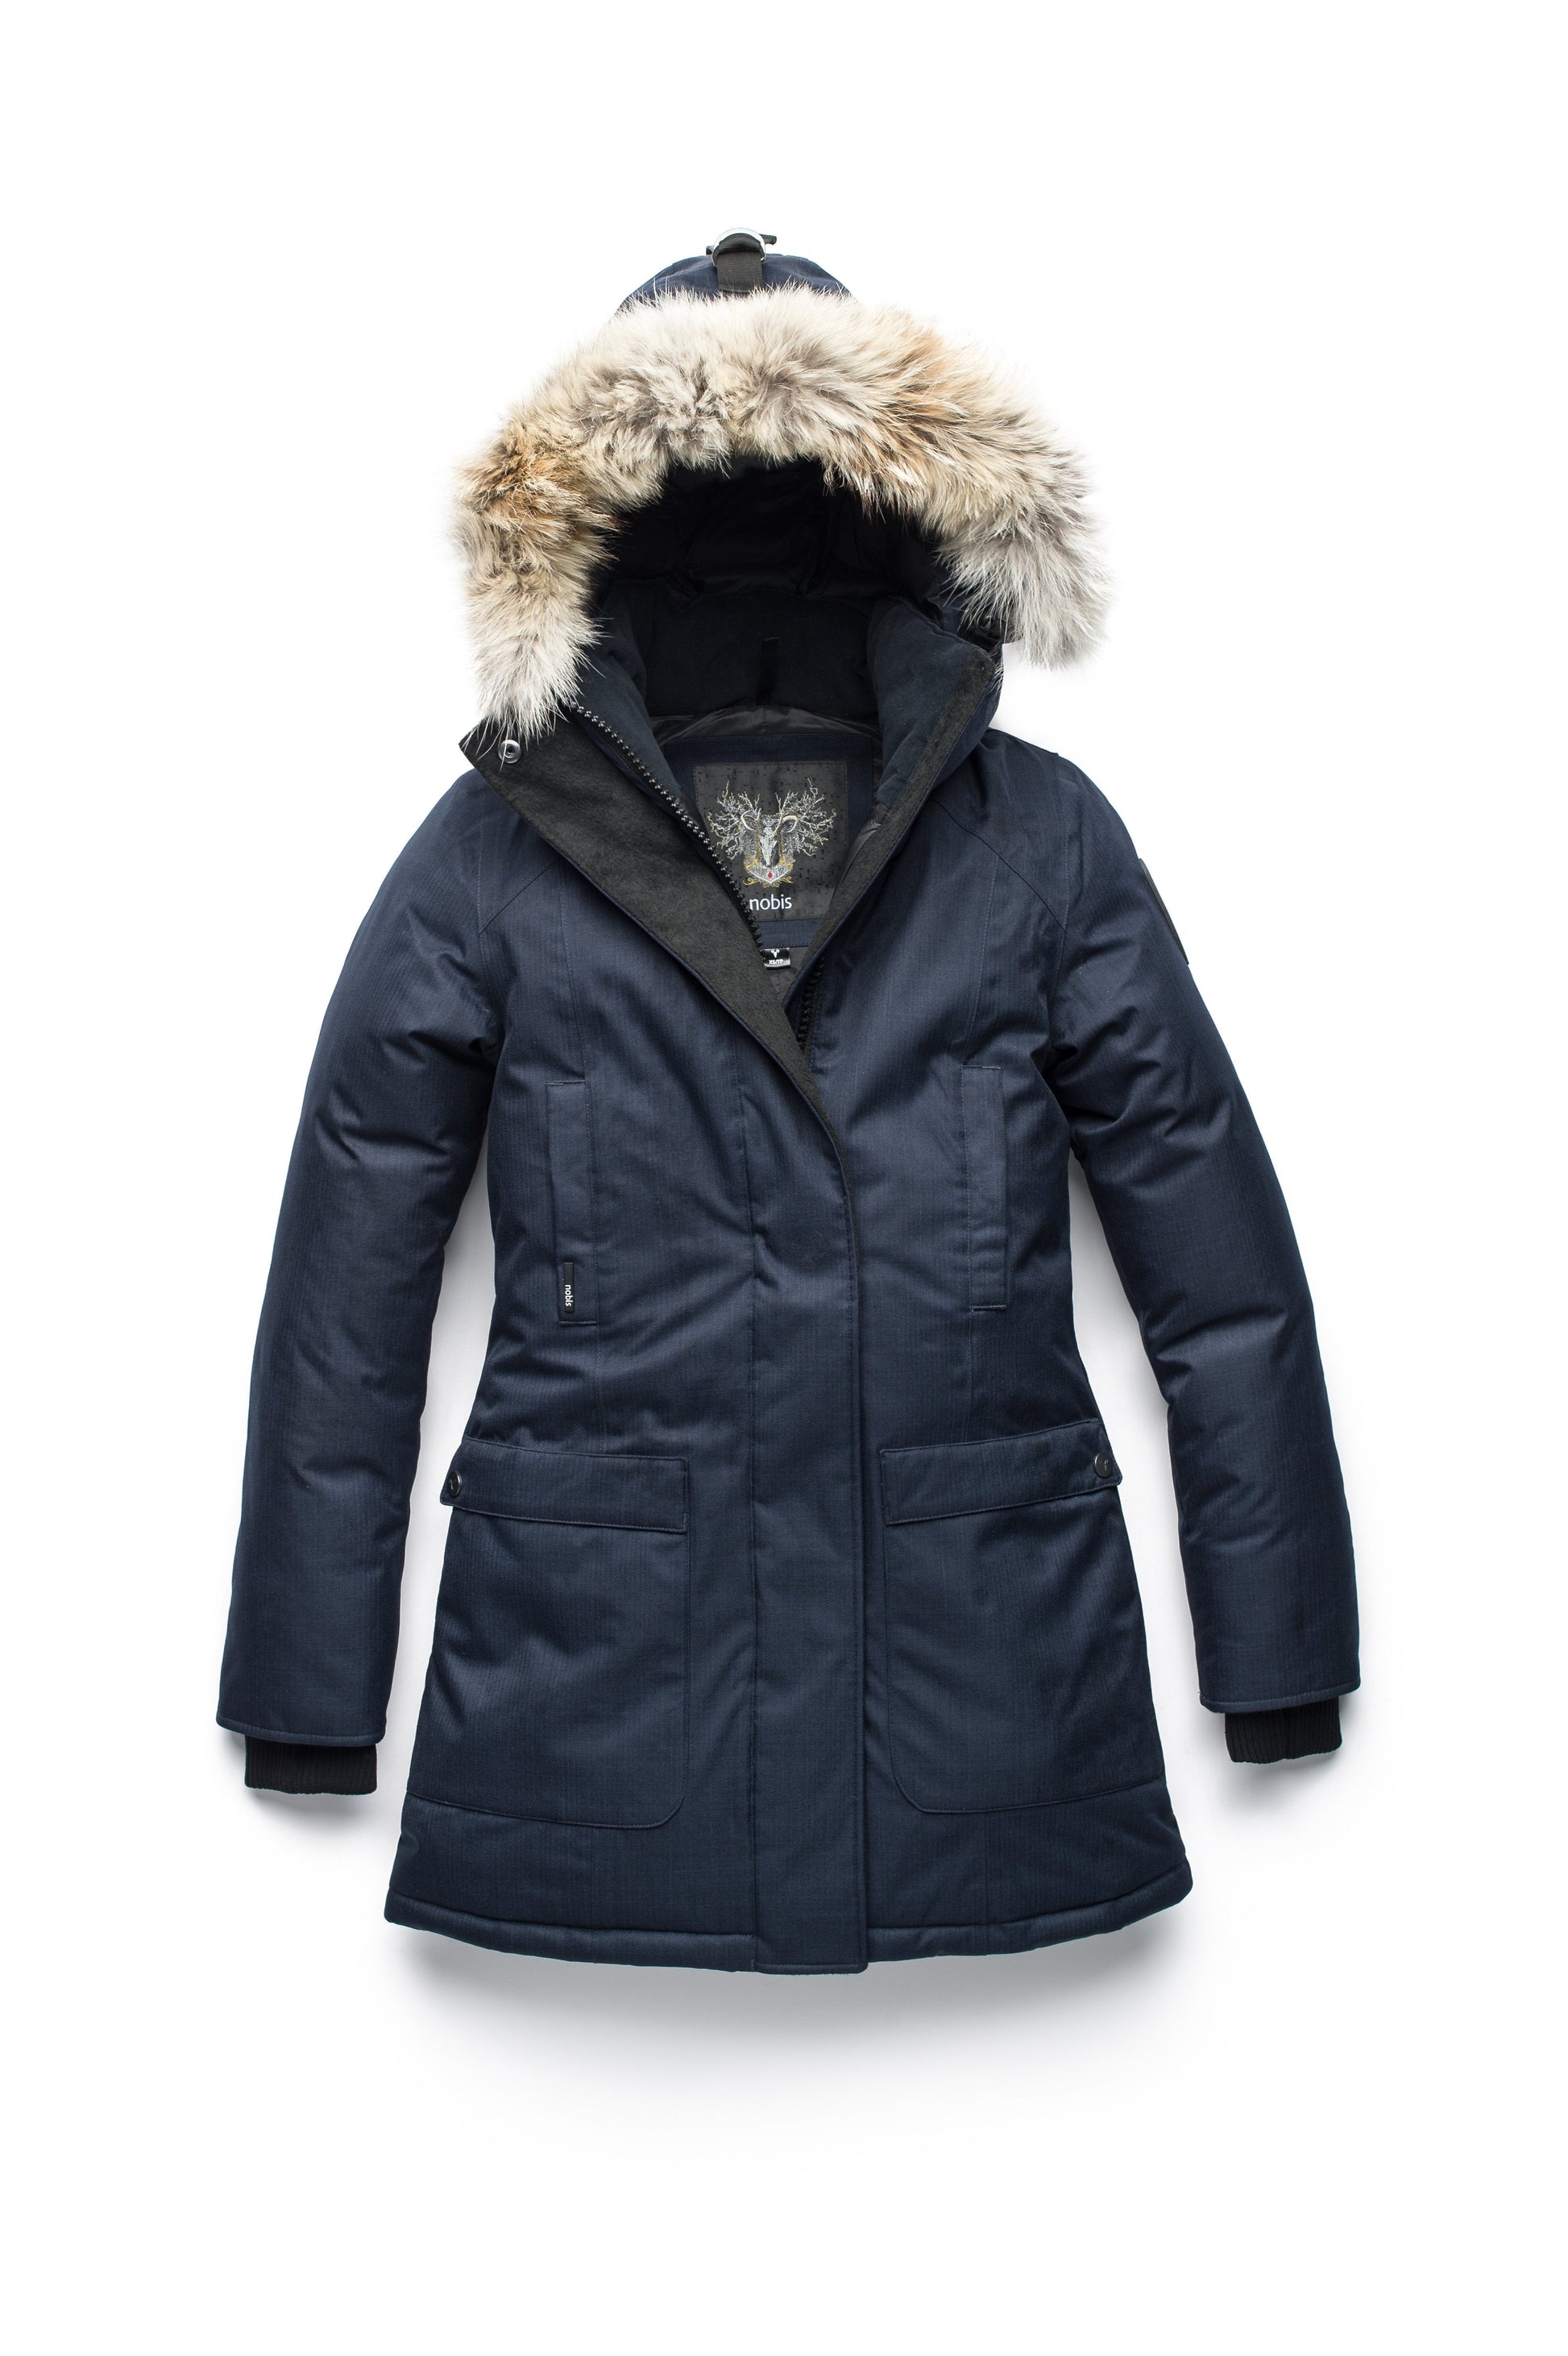 Women's down filled parka that sits just below the hip with a clean look and two hip patch pockets in CH Navy